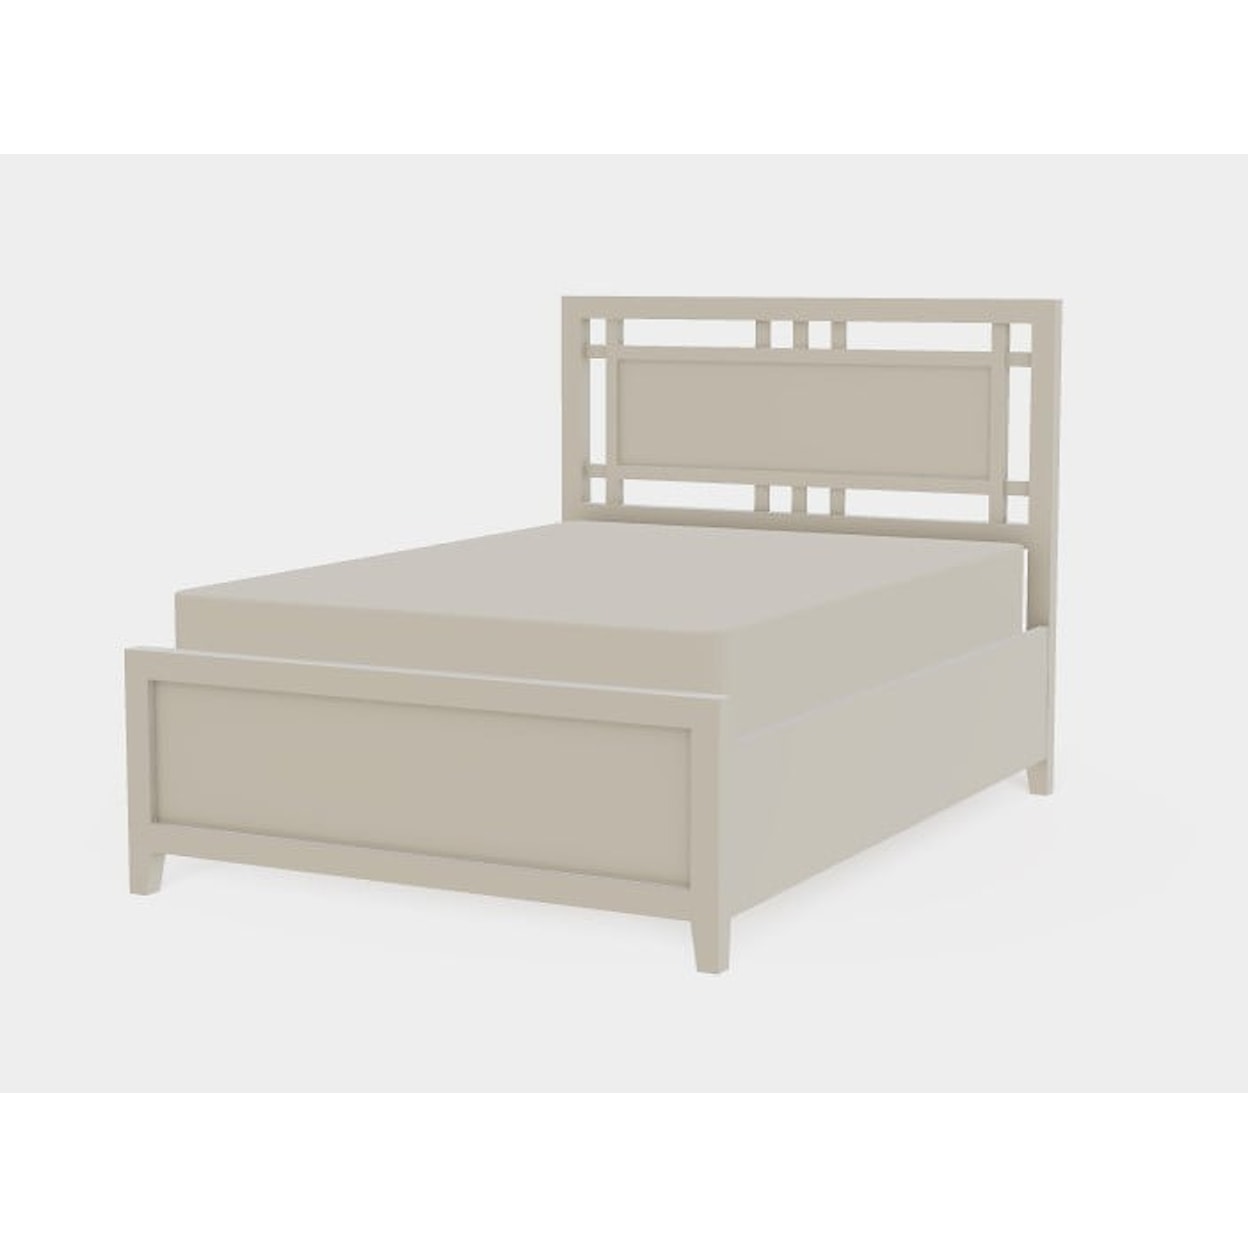 Mavin Atwood Group Atwood Full Left Drawerside Gridwork Bed